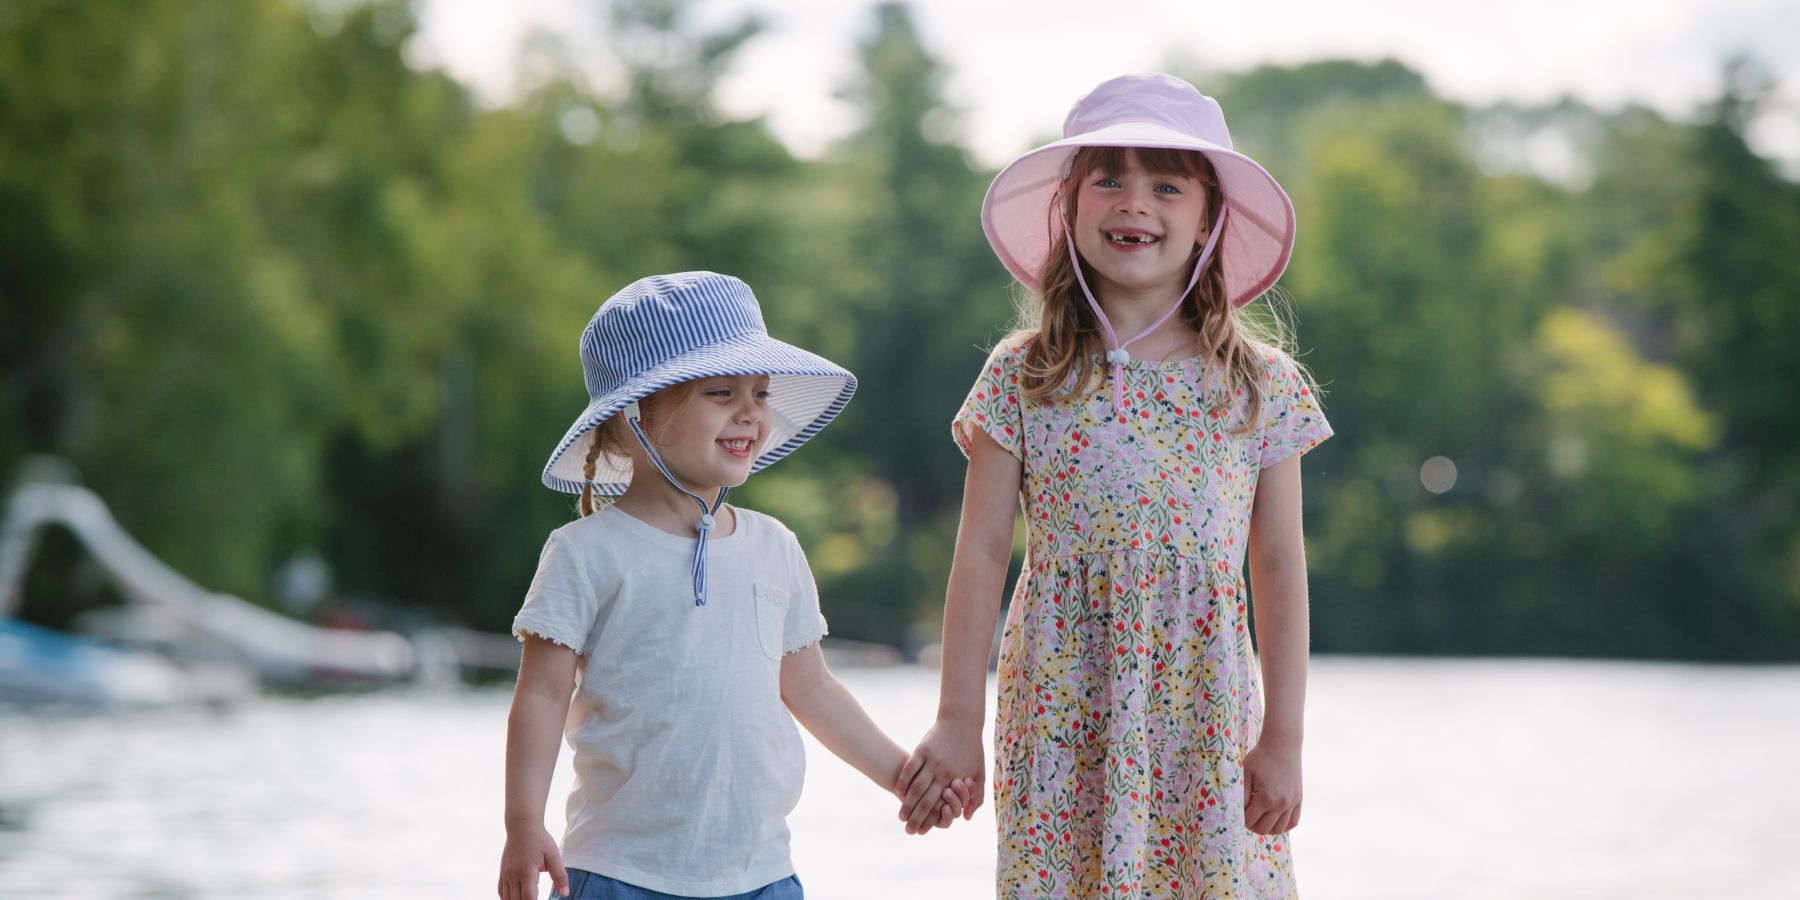 Kids UPF50 Sun Protection Hats Made in Canada by Puffin Gear, Linen, Organic Cotton, Prints, Oxford Cotton, Solar Nylon-Sustainably made, Hand-me-down quality, chin ties with toggles and break away clips keep hats safely in place. Machine Washable